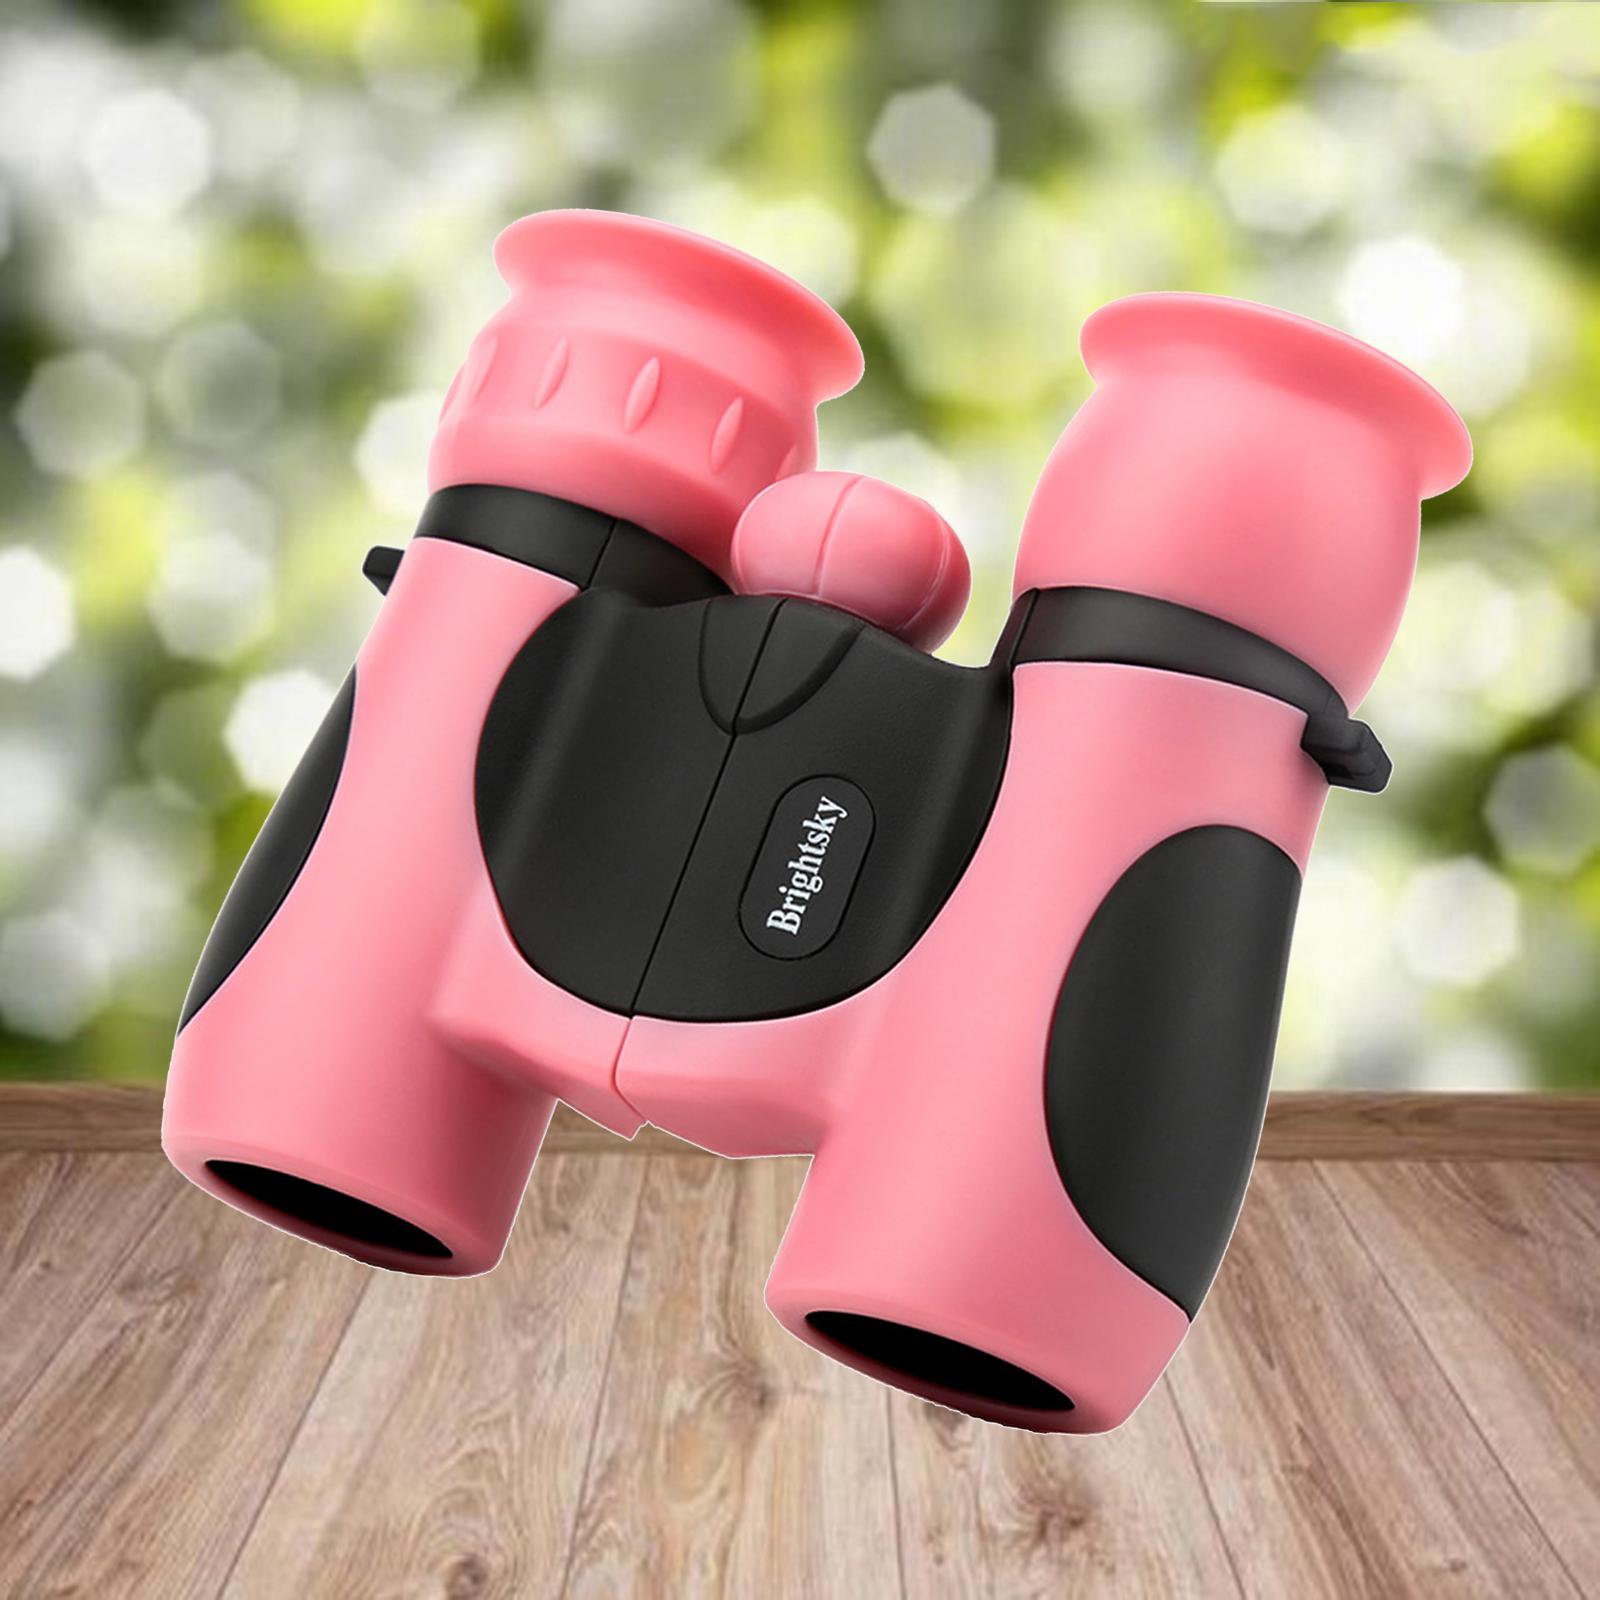 Shockproof Binoculars Small 8x21 for Kids Discover Travel Camping pink